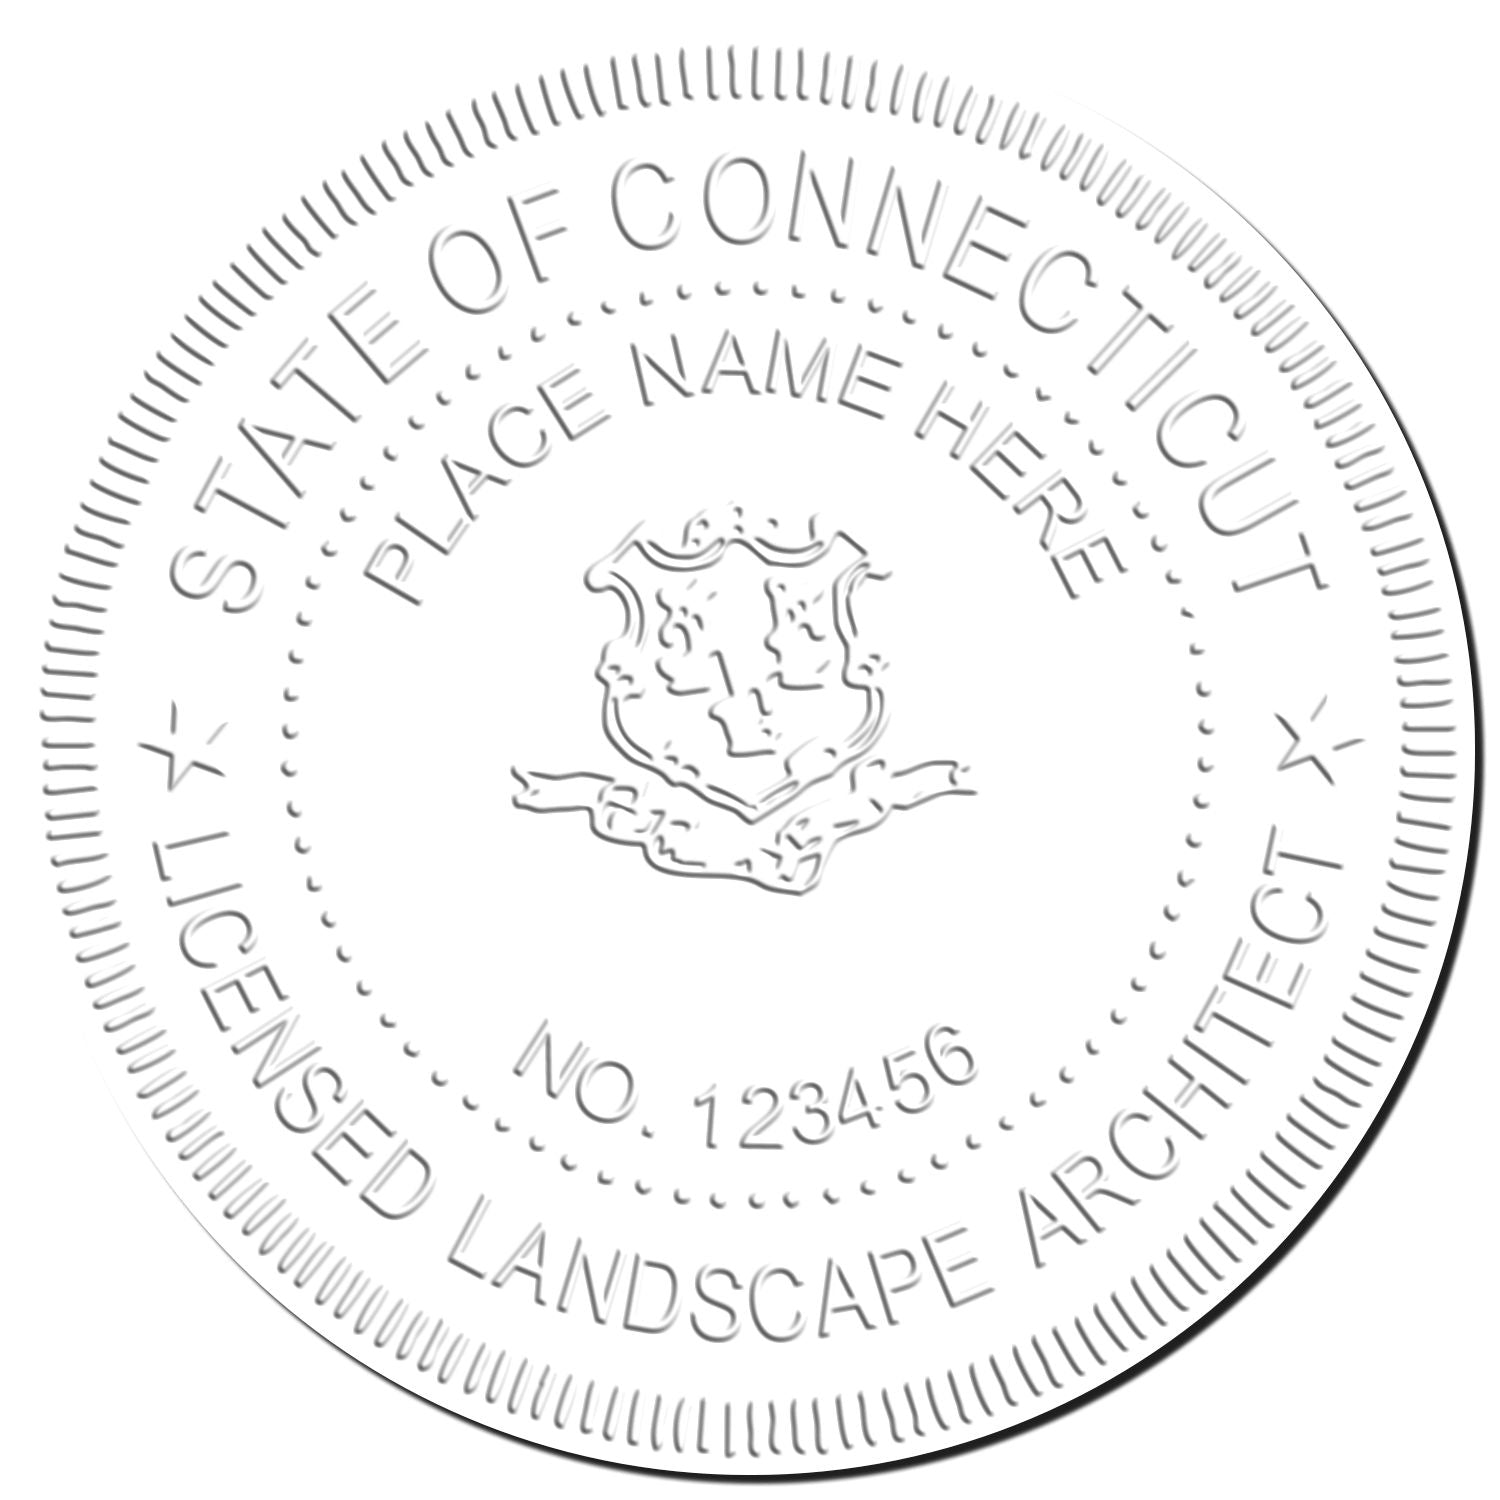 This paper is stamped with a sample imprint of the State of Connecticut Handheld Landscape Architect Seal, signifying its quality and reliability.